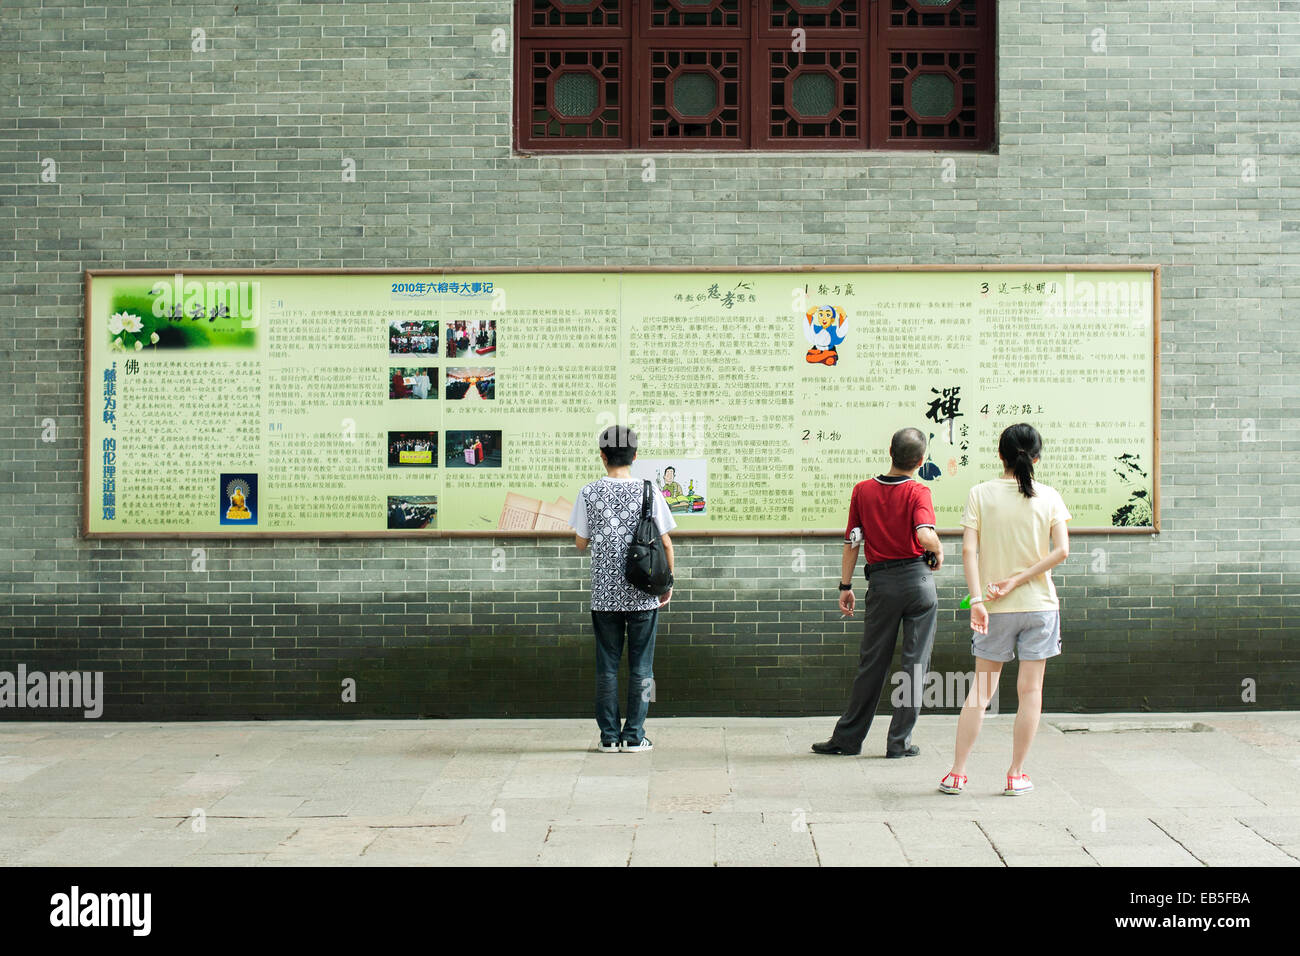 people looking at an information sign at a shrine in China Stock Photo